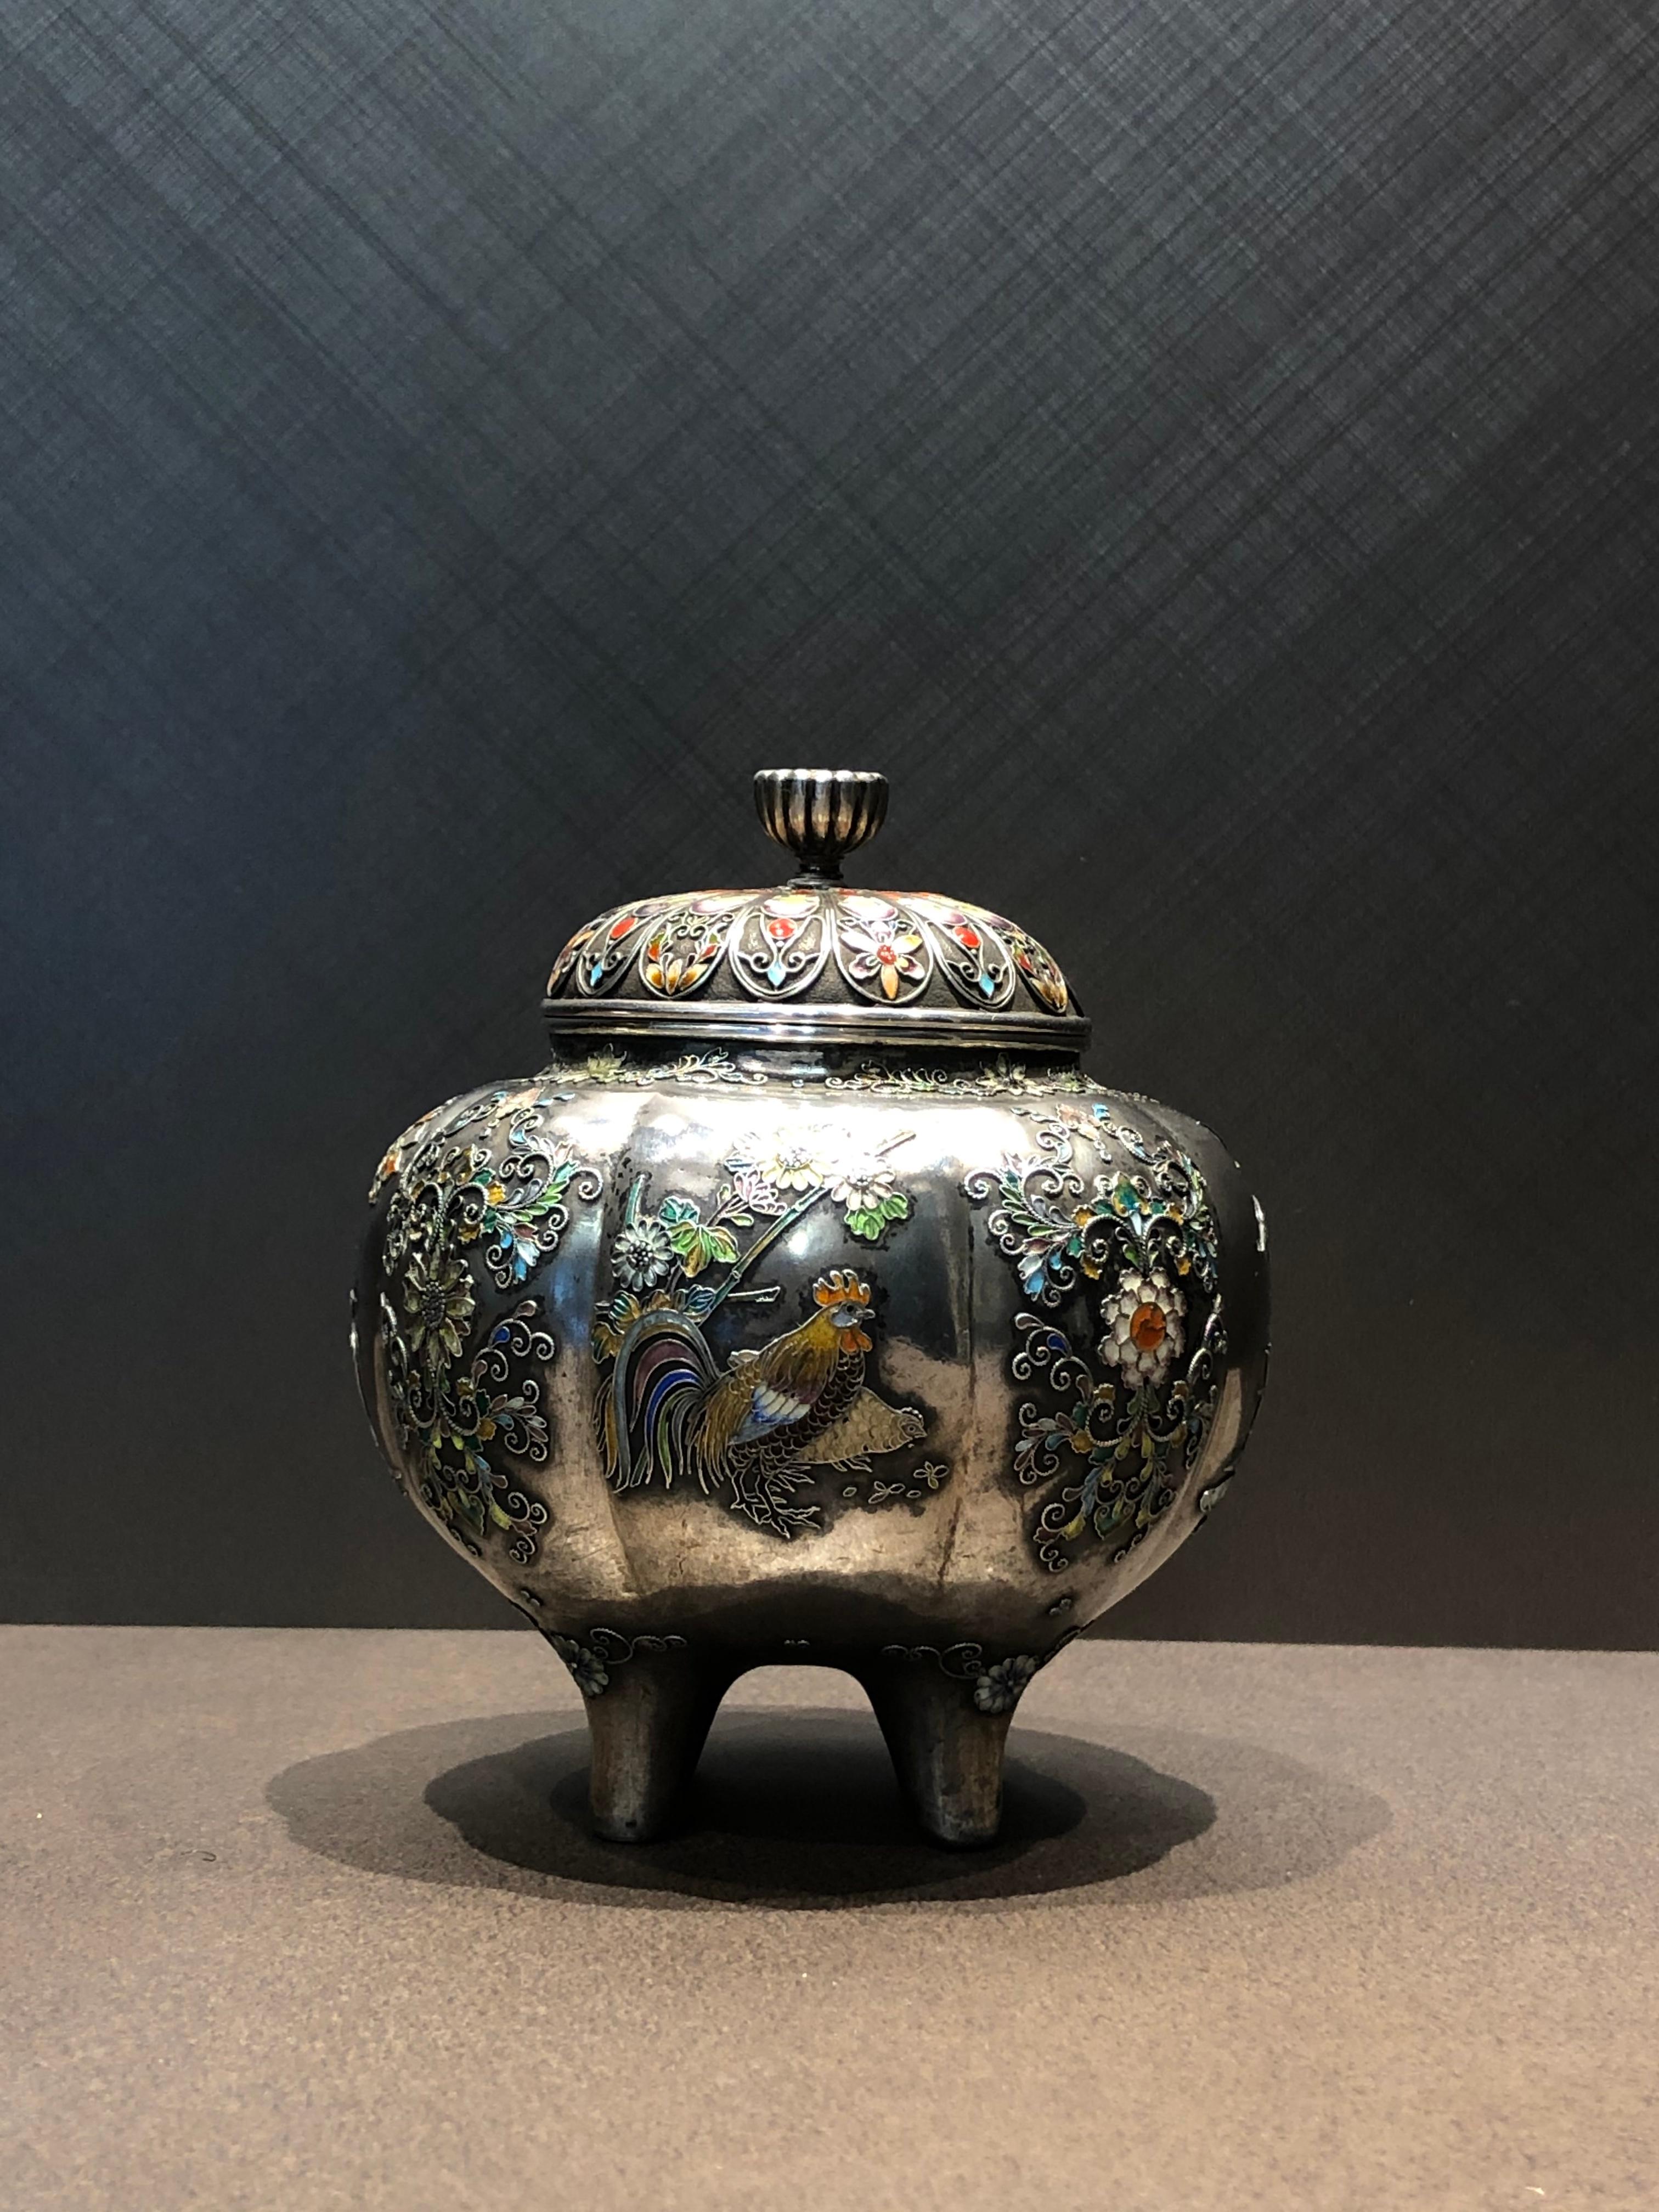 Incense burner inlaid with cloisonne enamel on silver, made in the Meiji period.
This is a gem of the Meiji period by Ipposai.

The circular body, has eight demensions with four legs.
Each side of the body is inlaid with crane, egret, chicken,